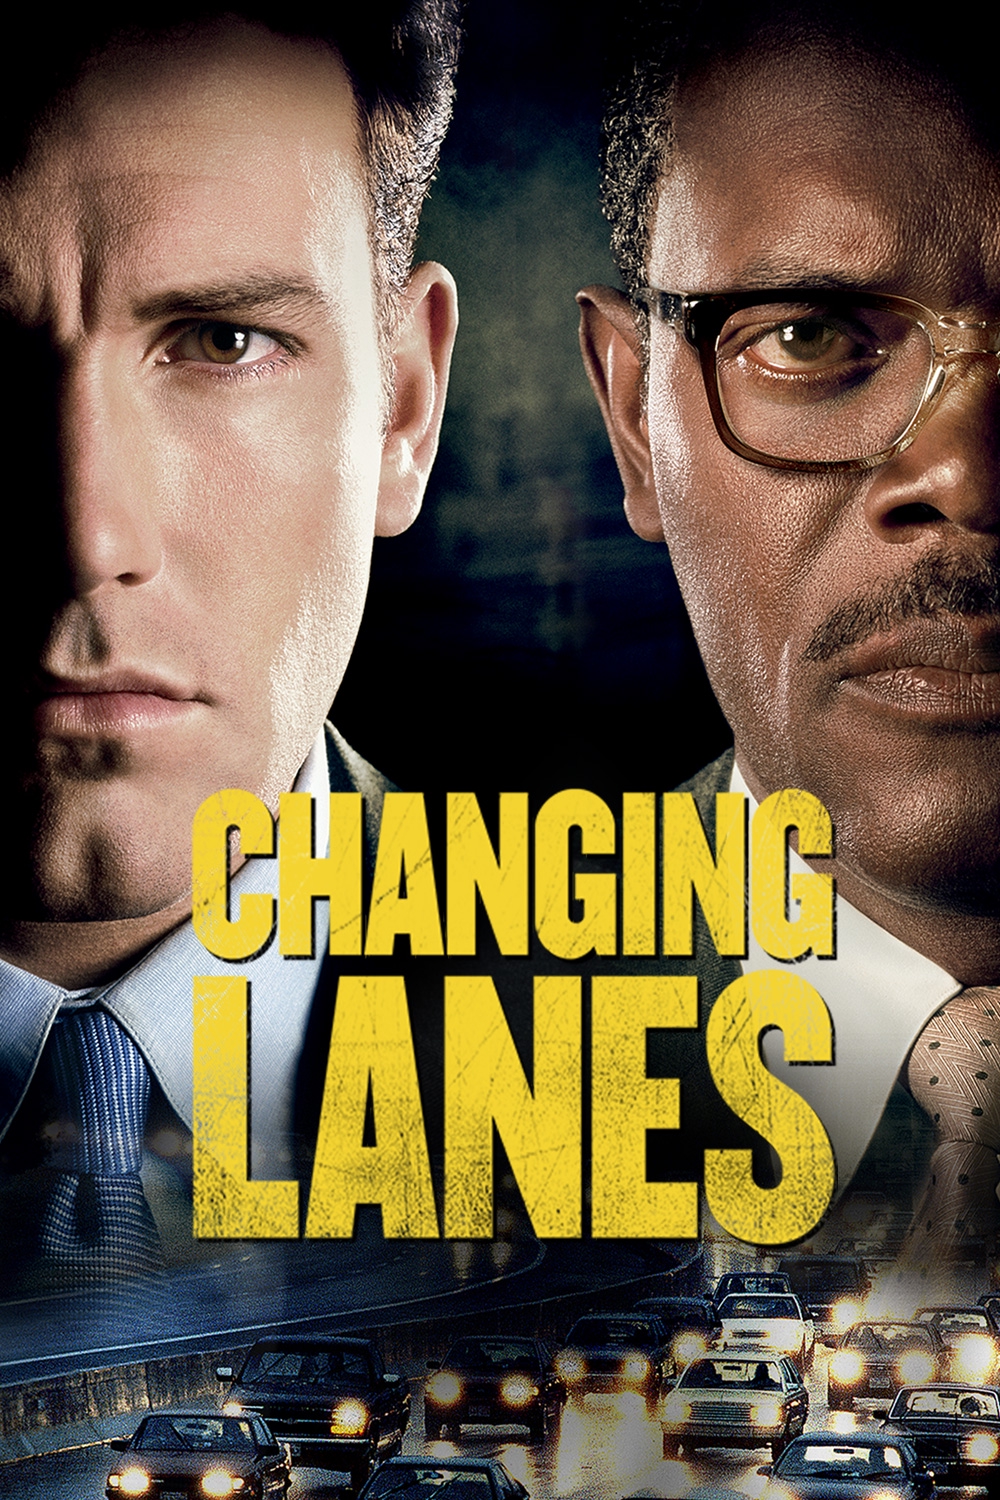 Changing Lanes streaming: where to watch online?